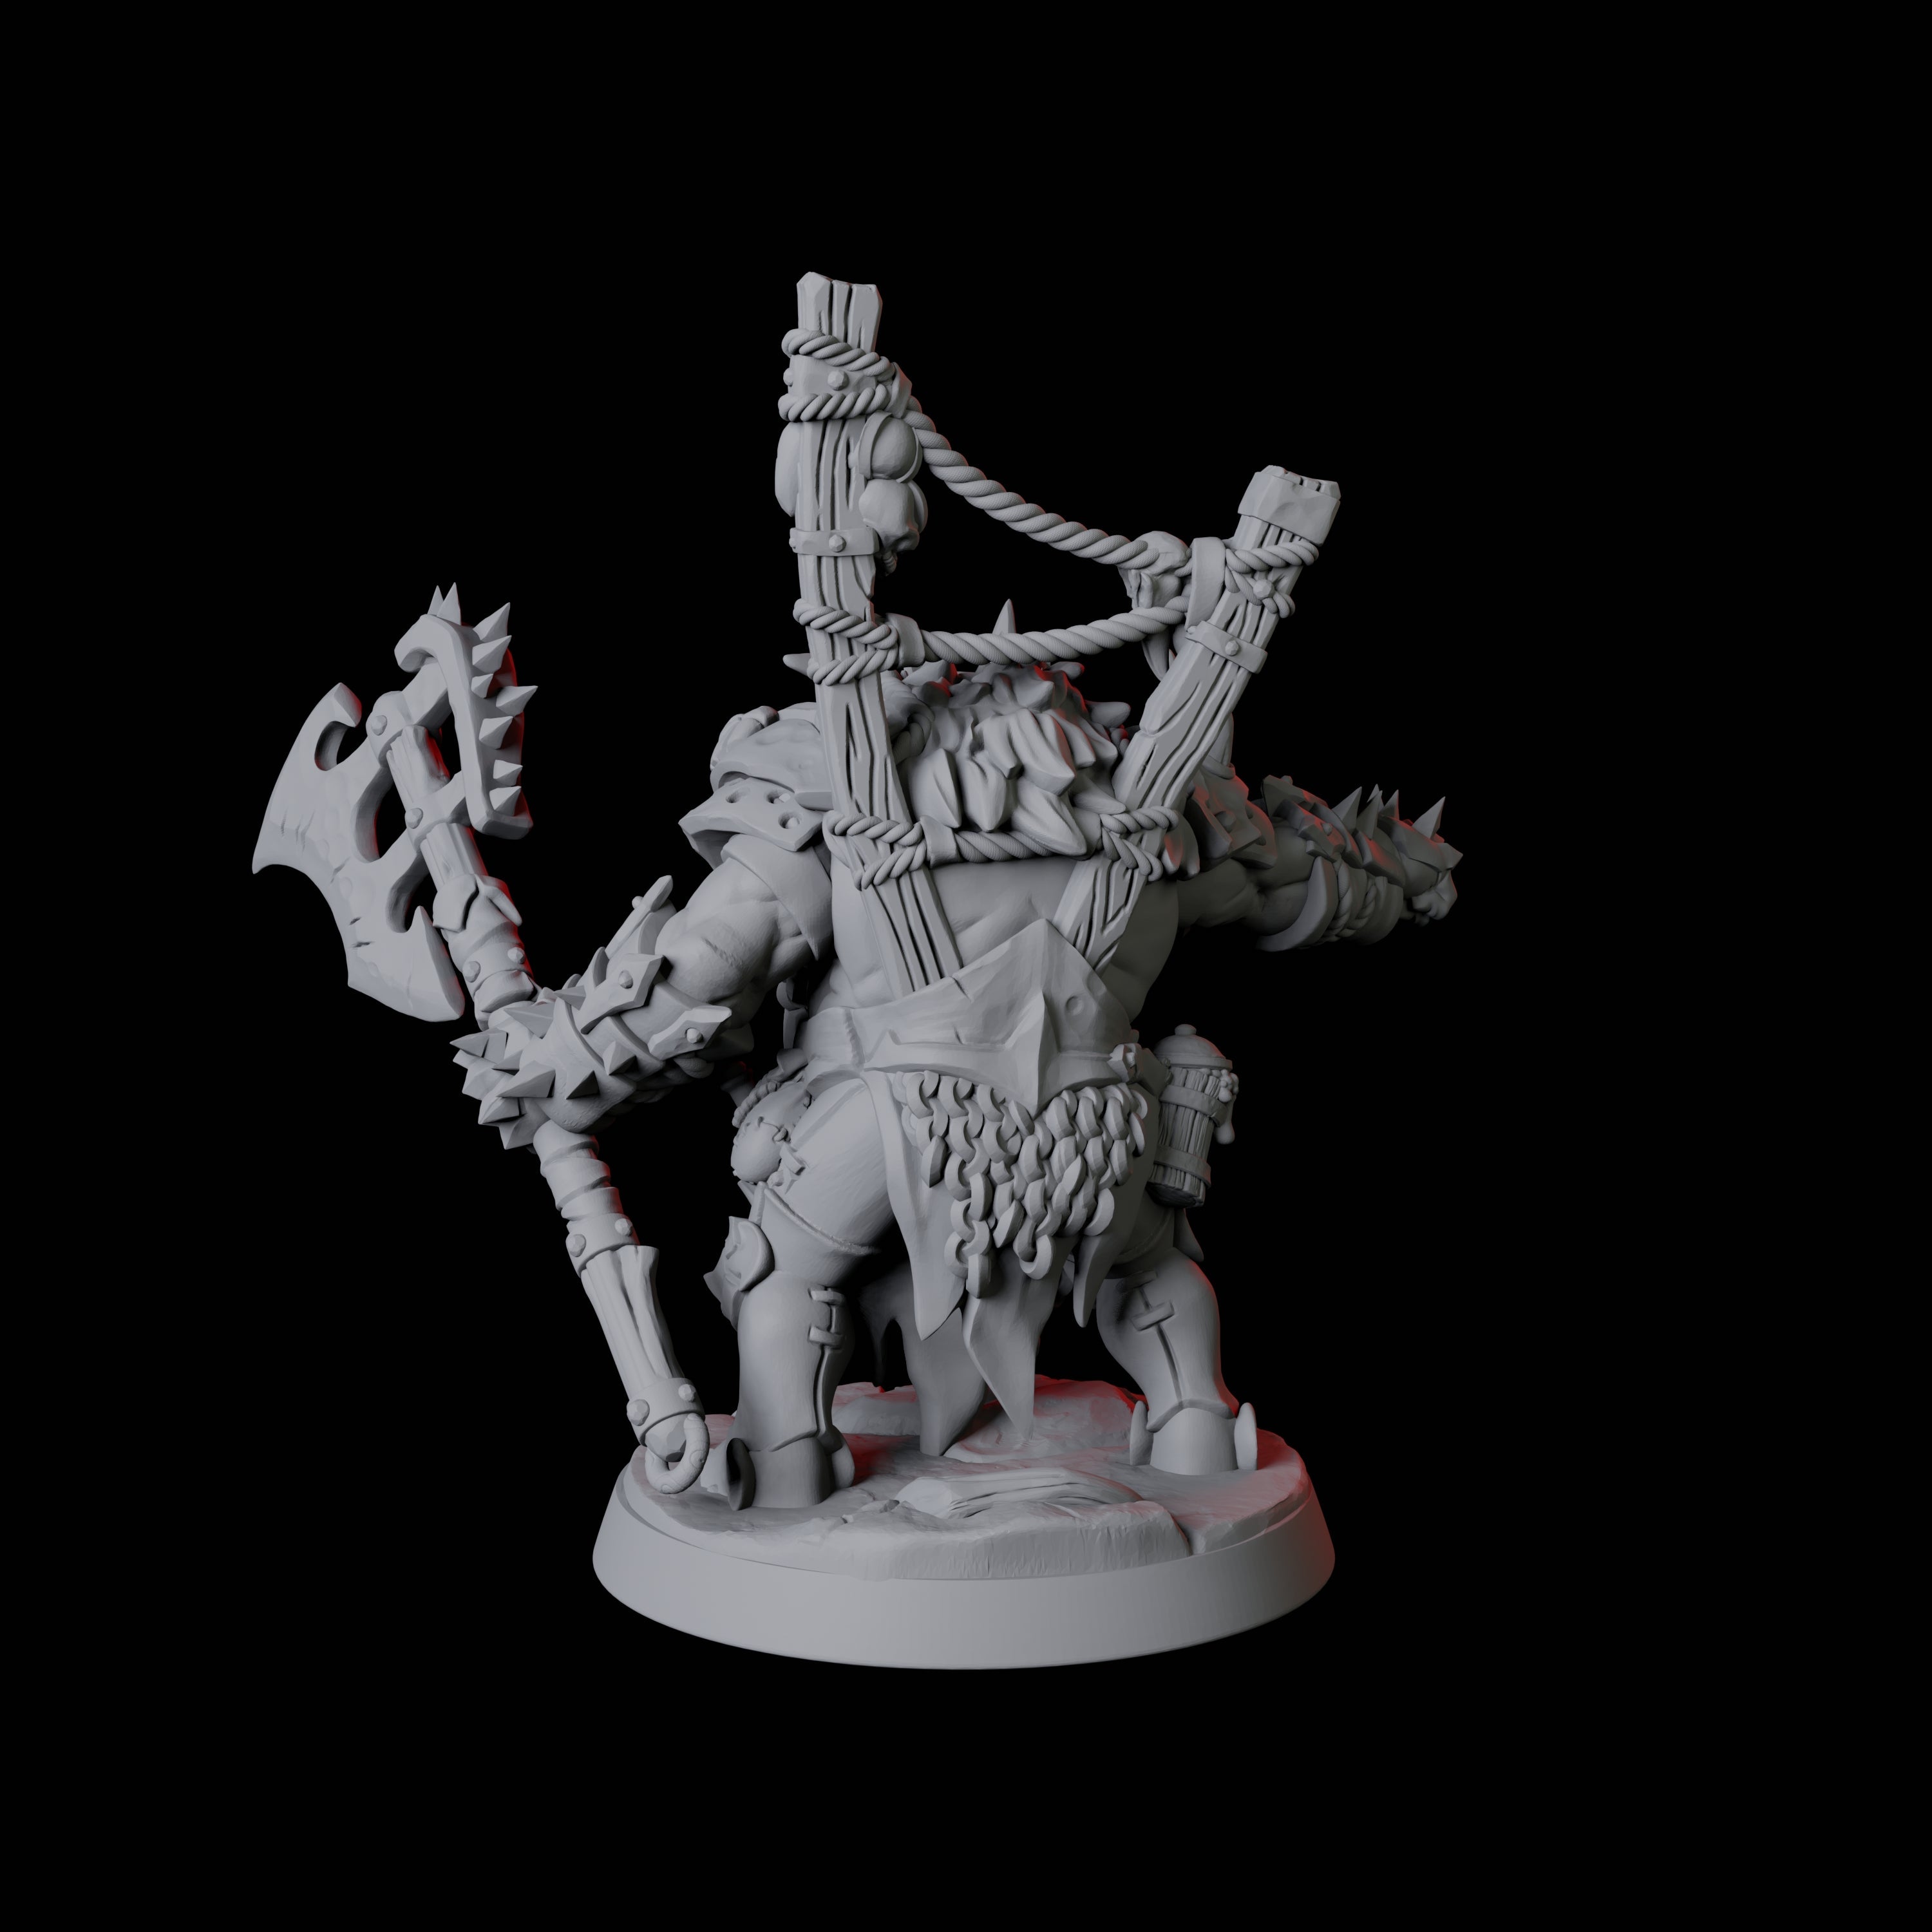 Pointing Goblin Leader Miniature for Dungeons and Dragons, Pathfinder or other TTRPGs